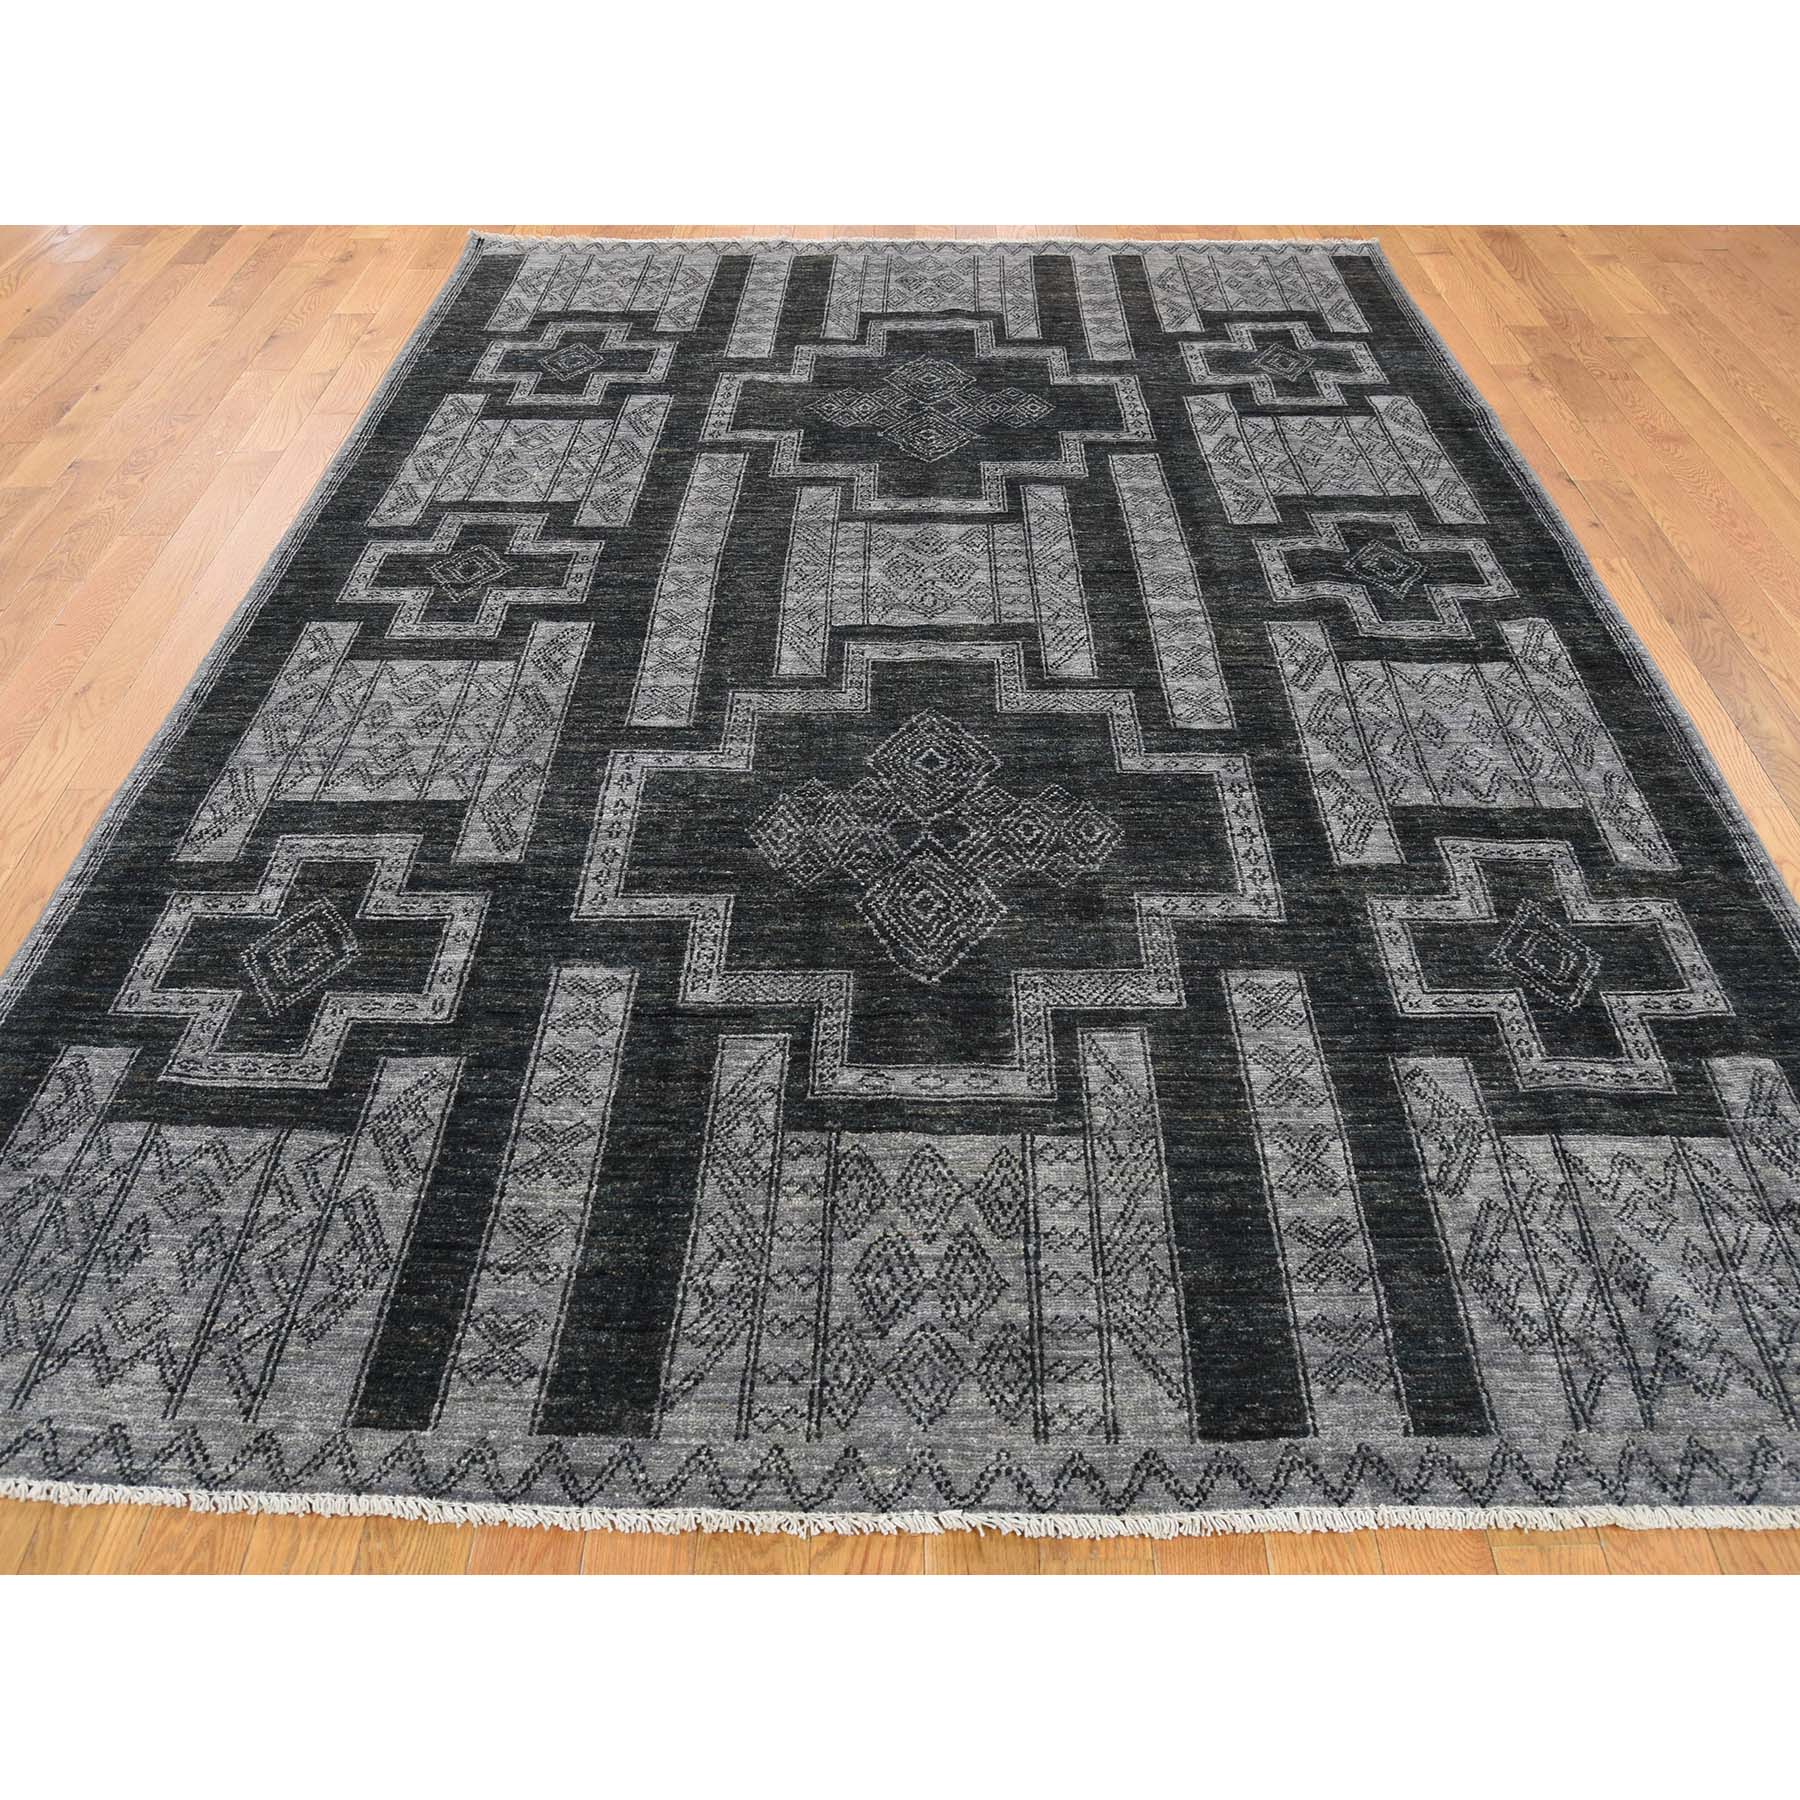 6-2 x9-2  Pure Wool Peshawar with Southwest Motifs Hand-Knotted Oriental Rug 